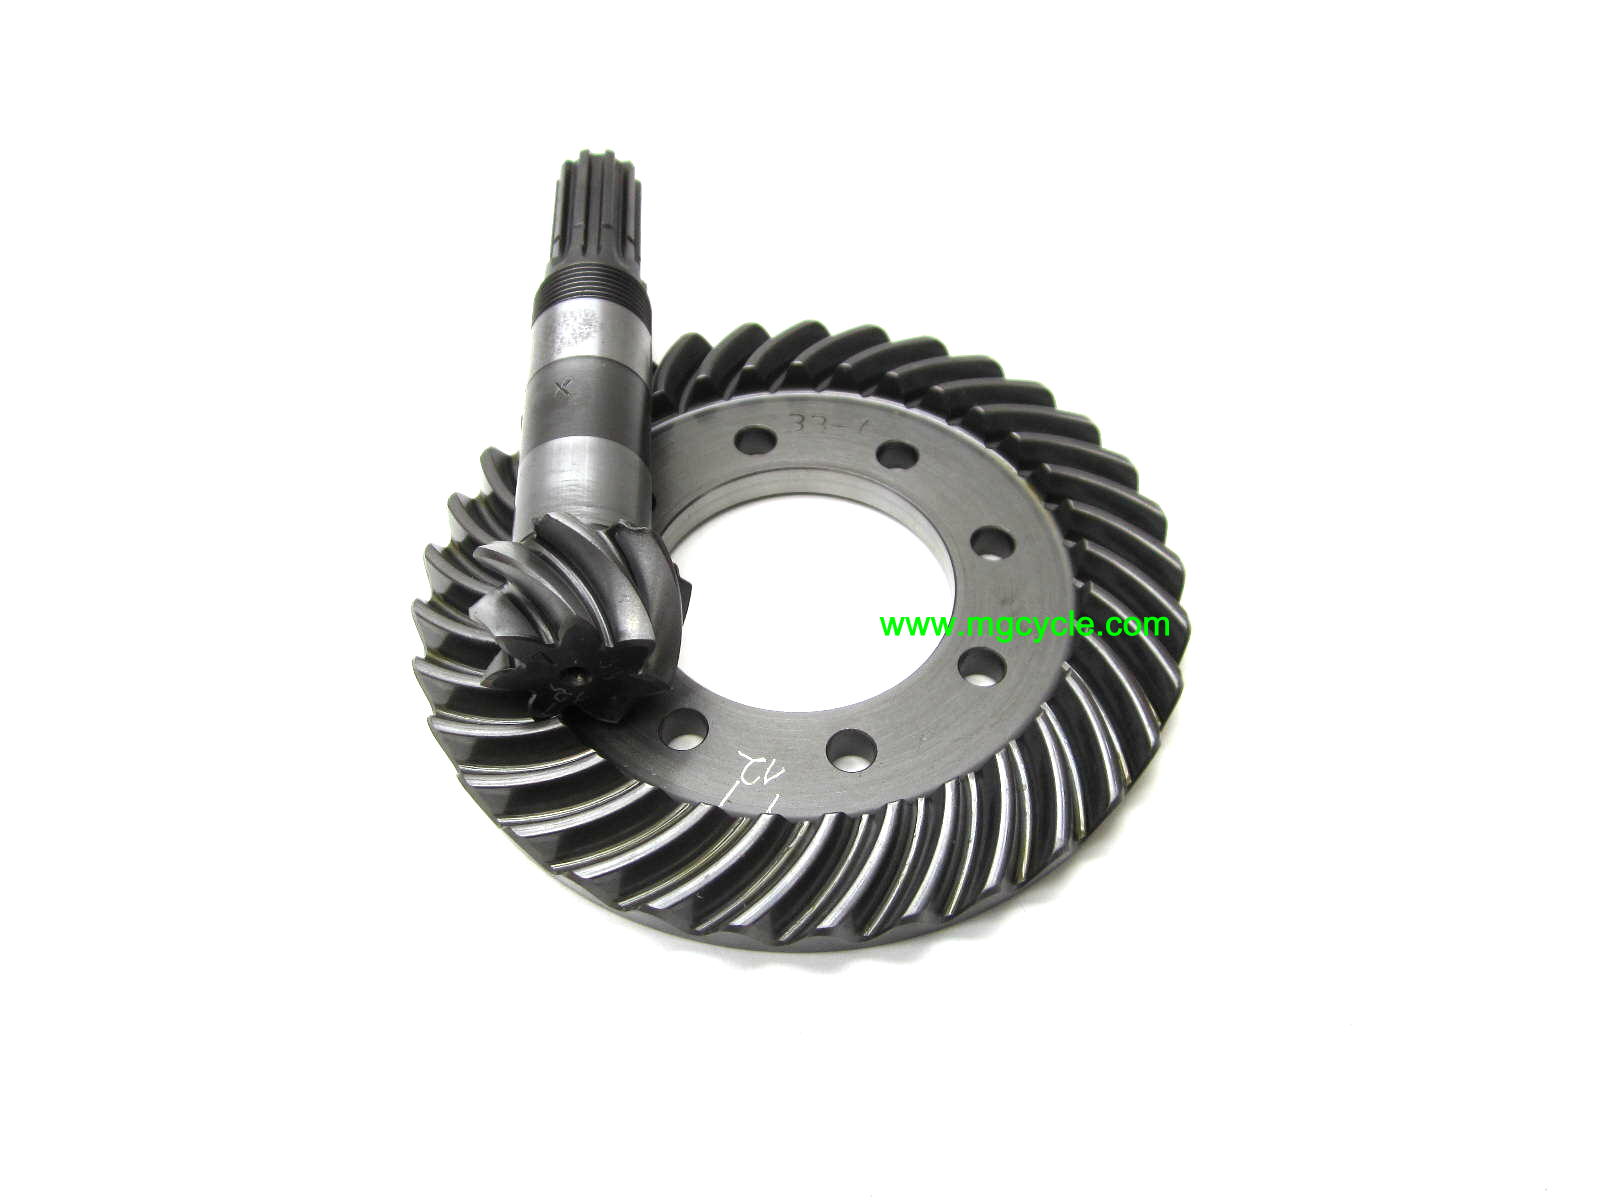 7/33 ring and pinion gear set 1975 to 1993 replaces GU17354650 - Click Image to Close